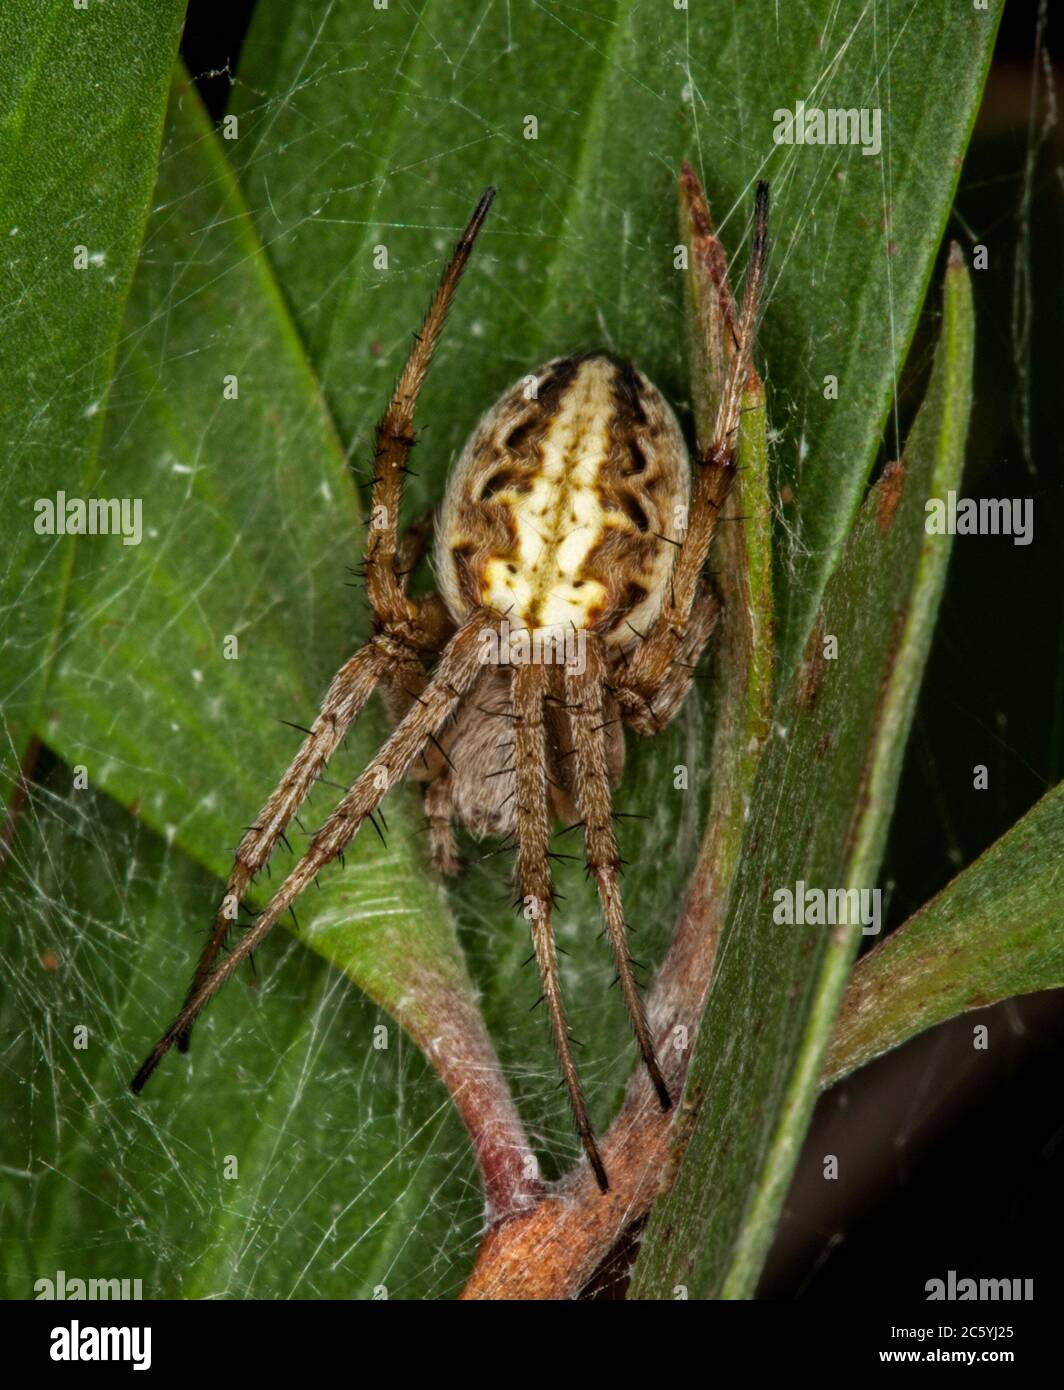 Orb Web Spider, Neoscona theisi, with ornate pattern on body, on green leaf in garden in Australia Stock Photo